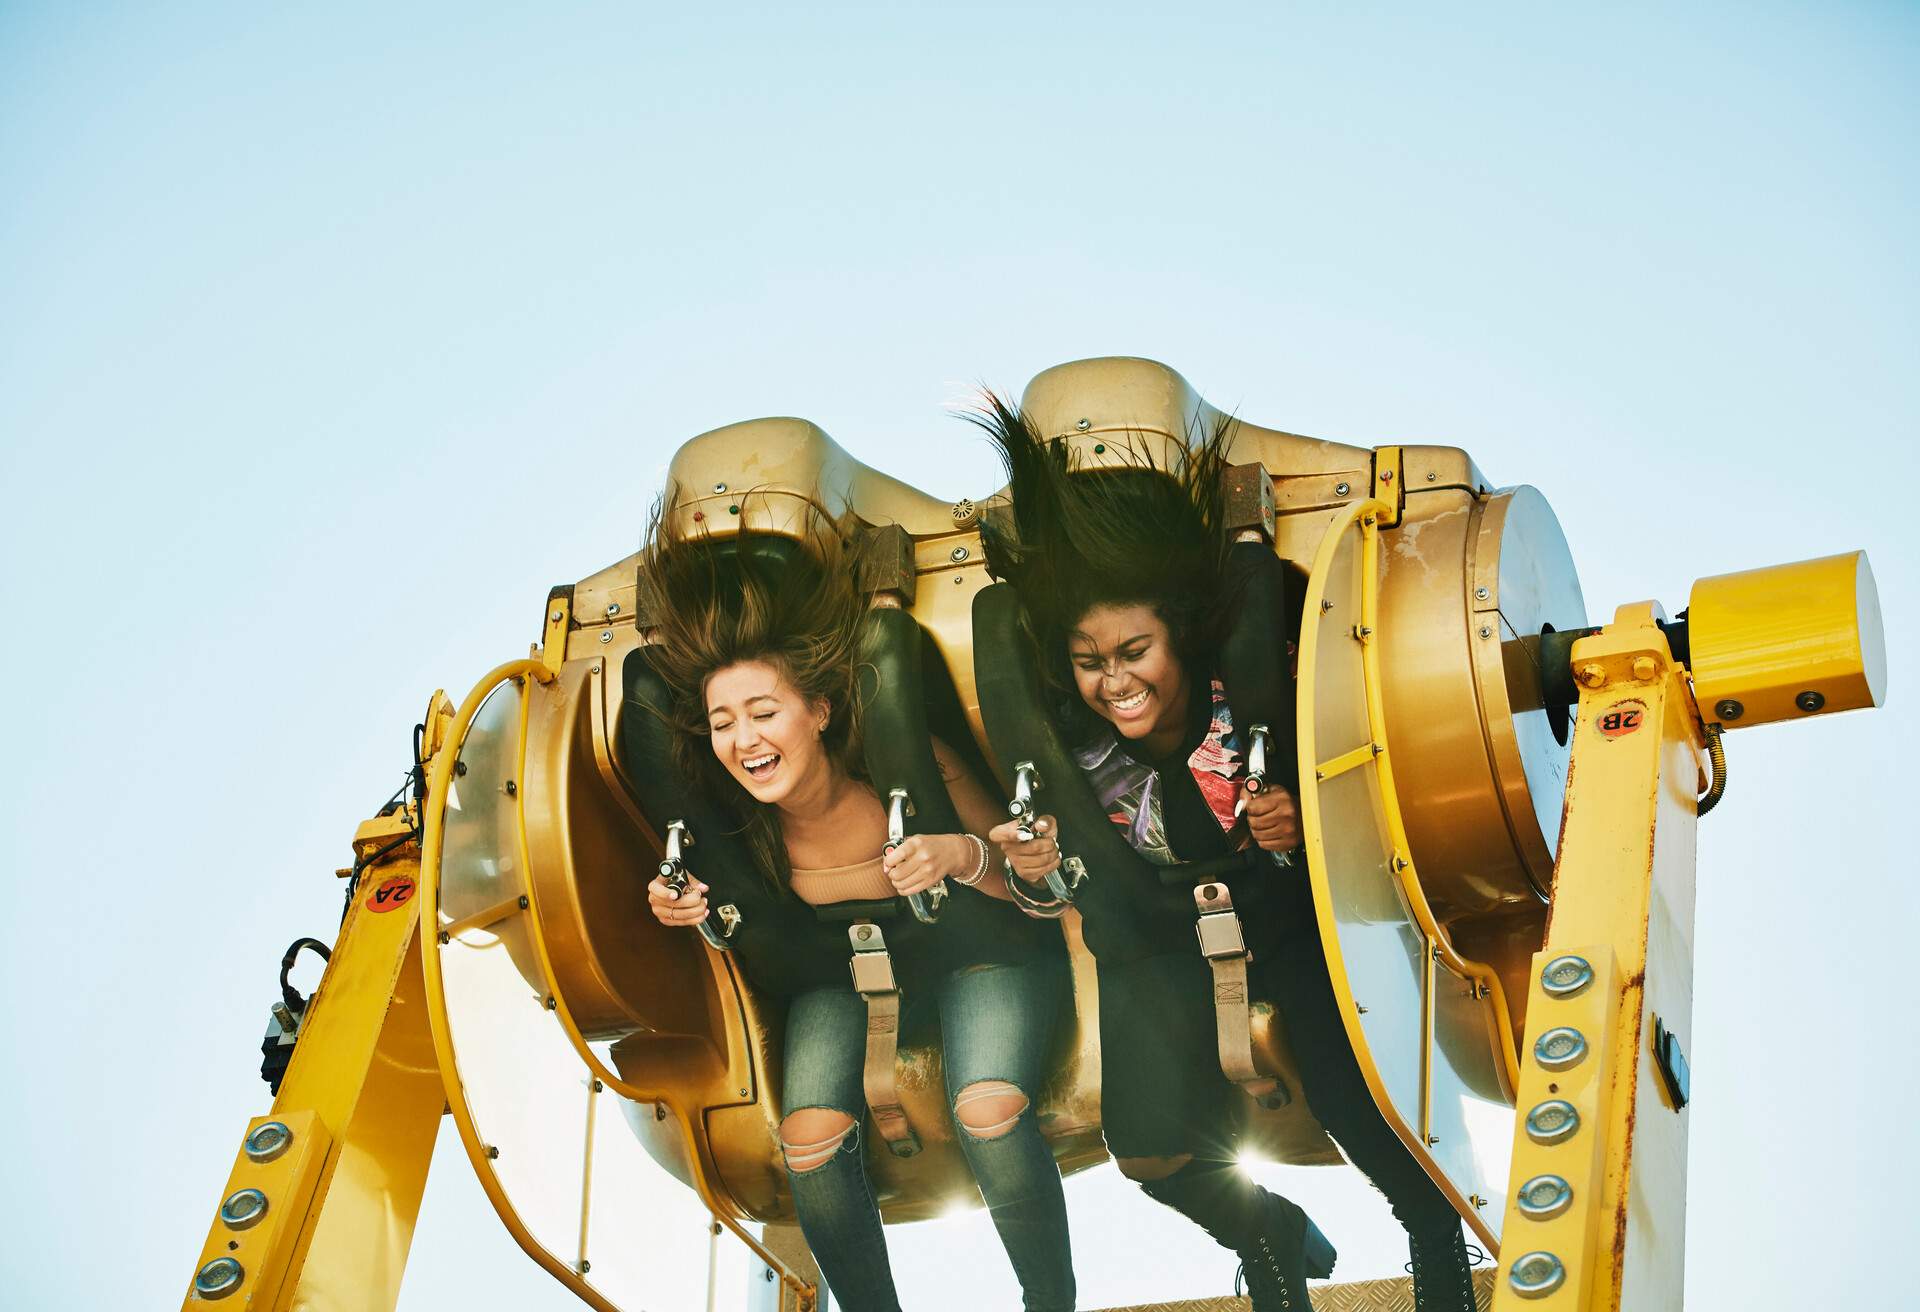 Two women going on a wild ride at an amusement park.